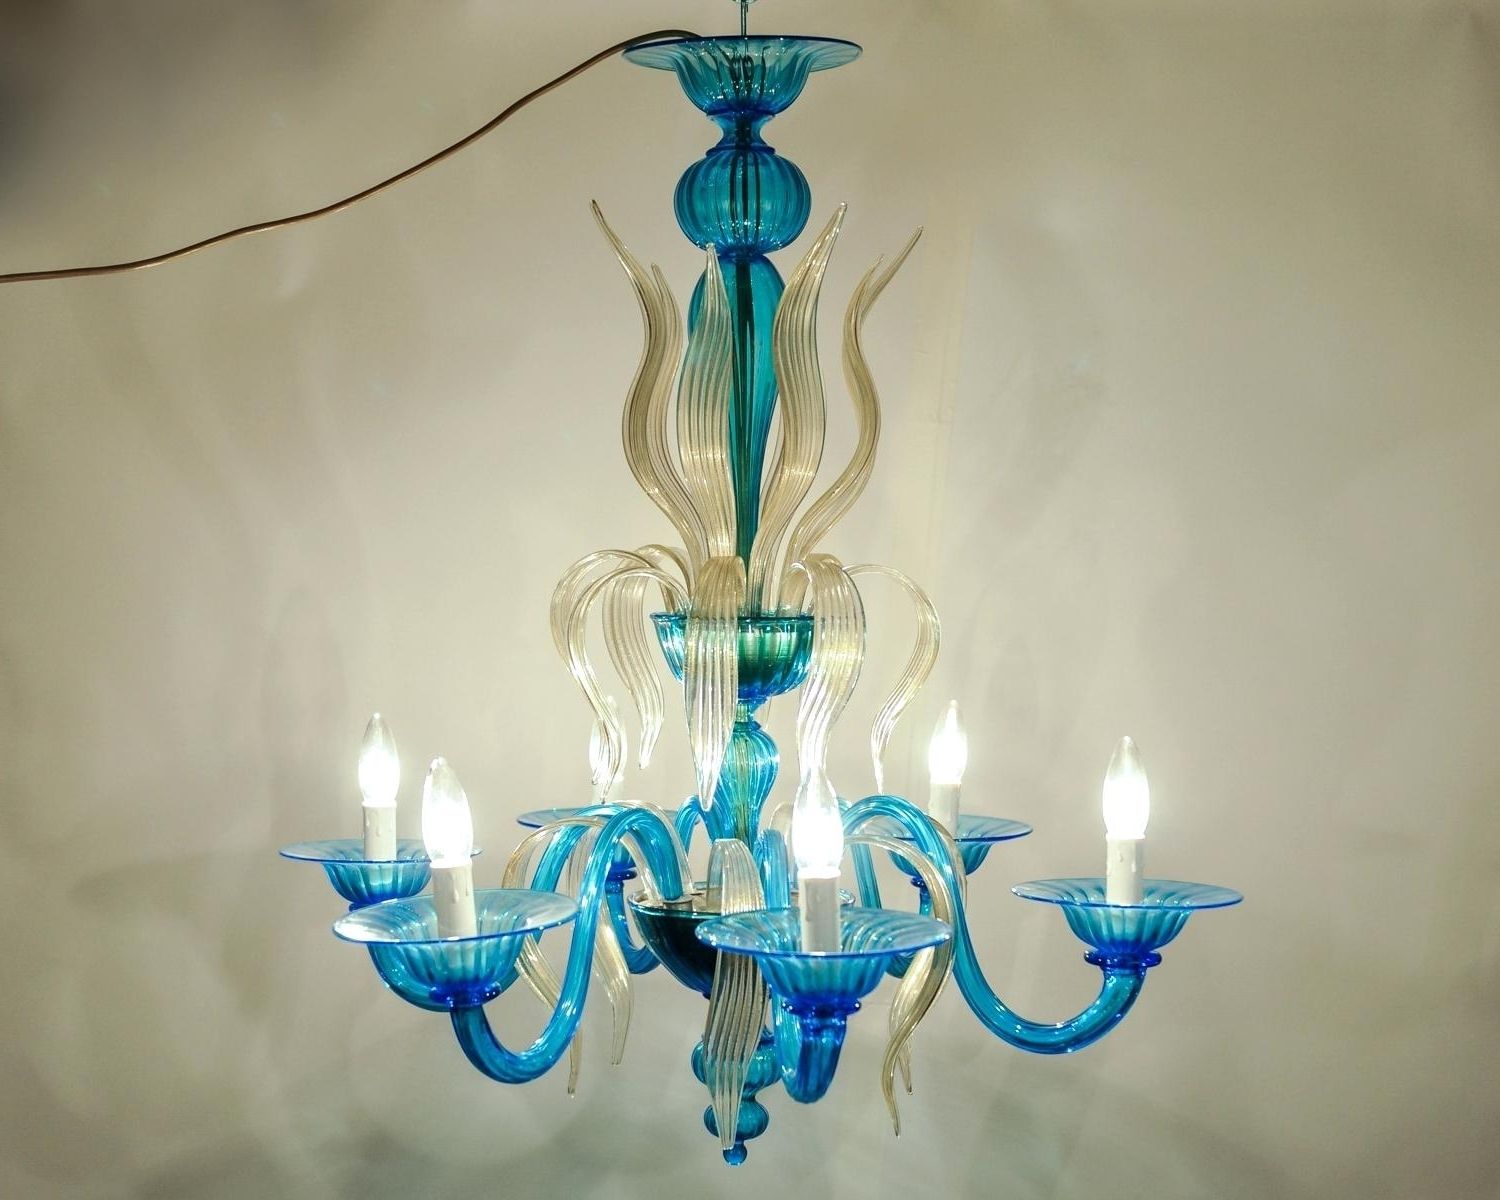 Turquoise Blown Glass Chandeliers With Preferred Hand Blown Glass Lamp Shades Six Arms Turquoise With Gold Flecks (View 6 of 15)